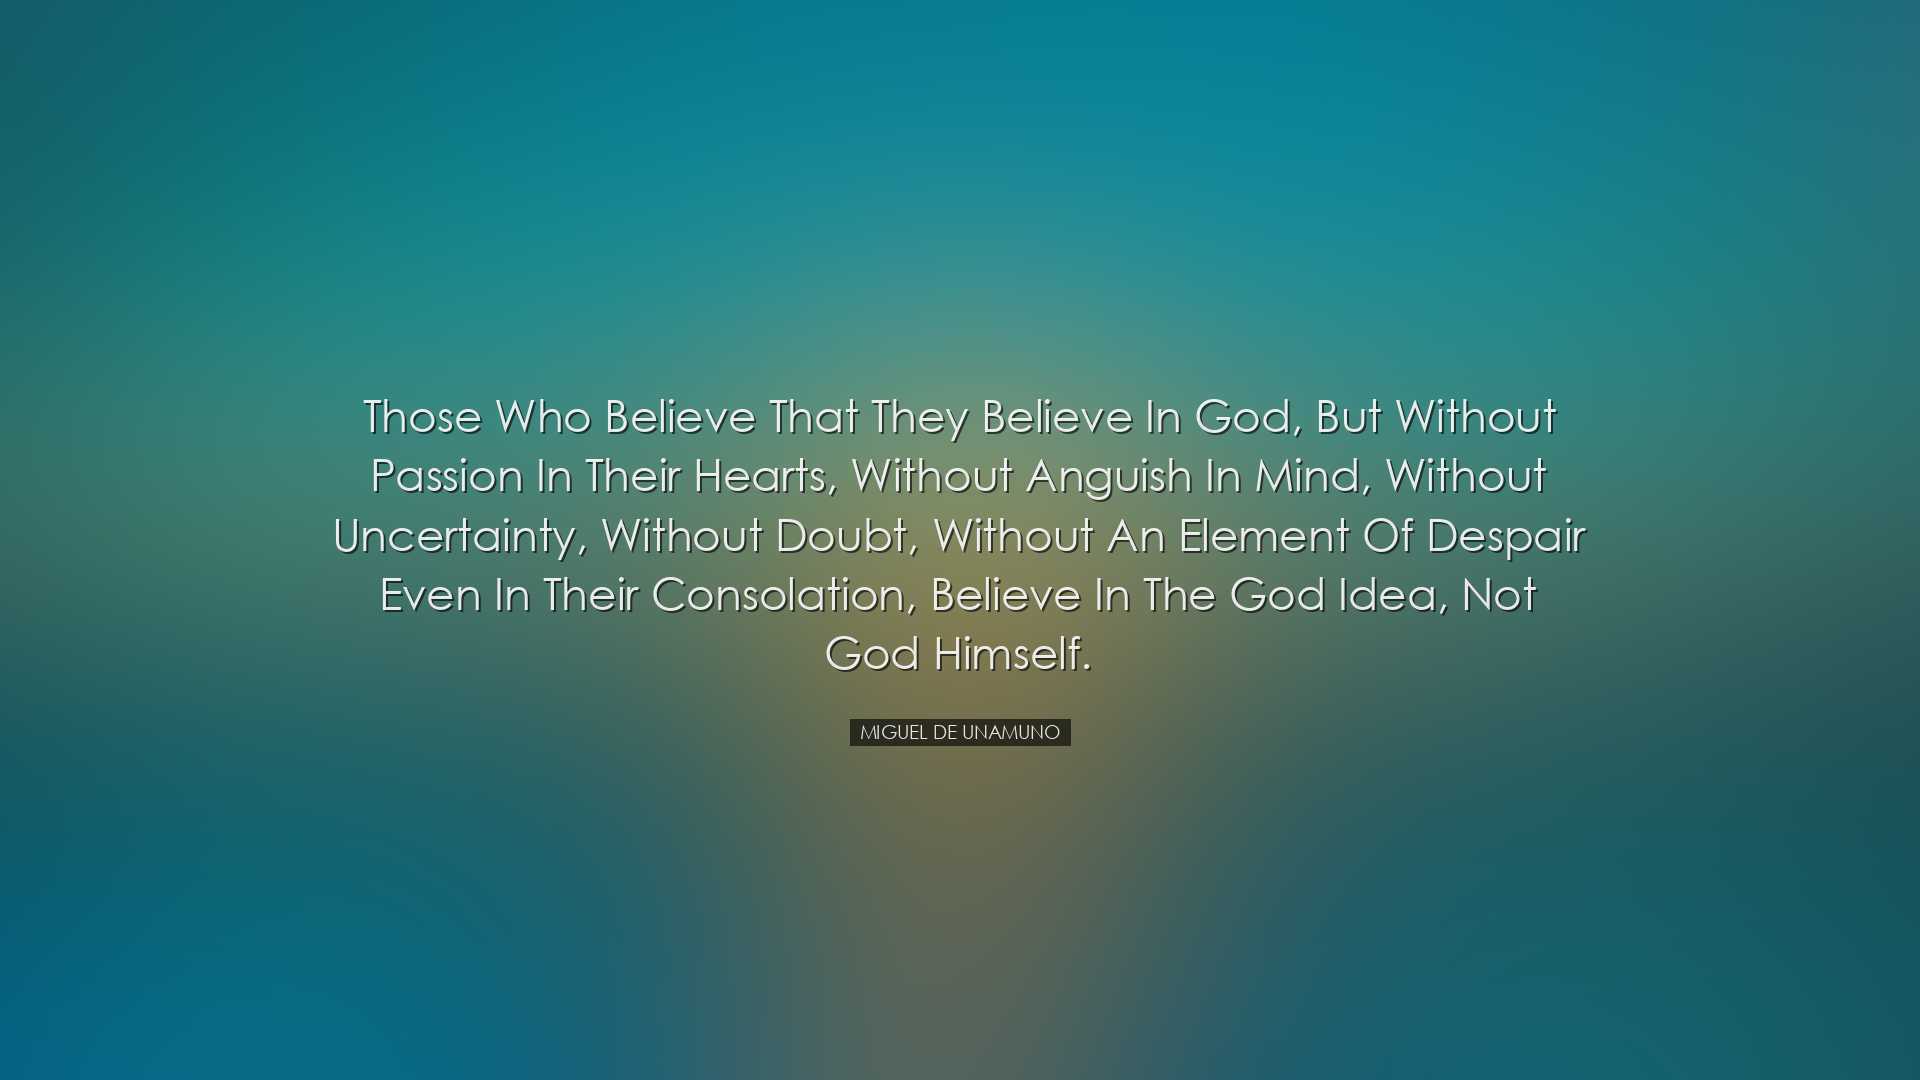 Those who believe that they believe in God, but without passion in